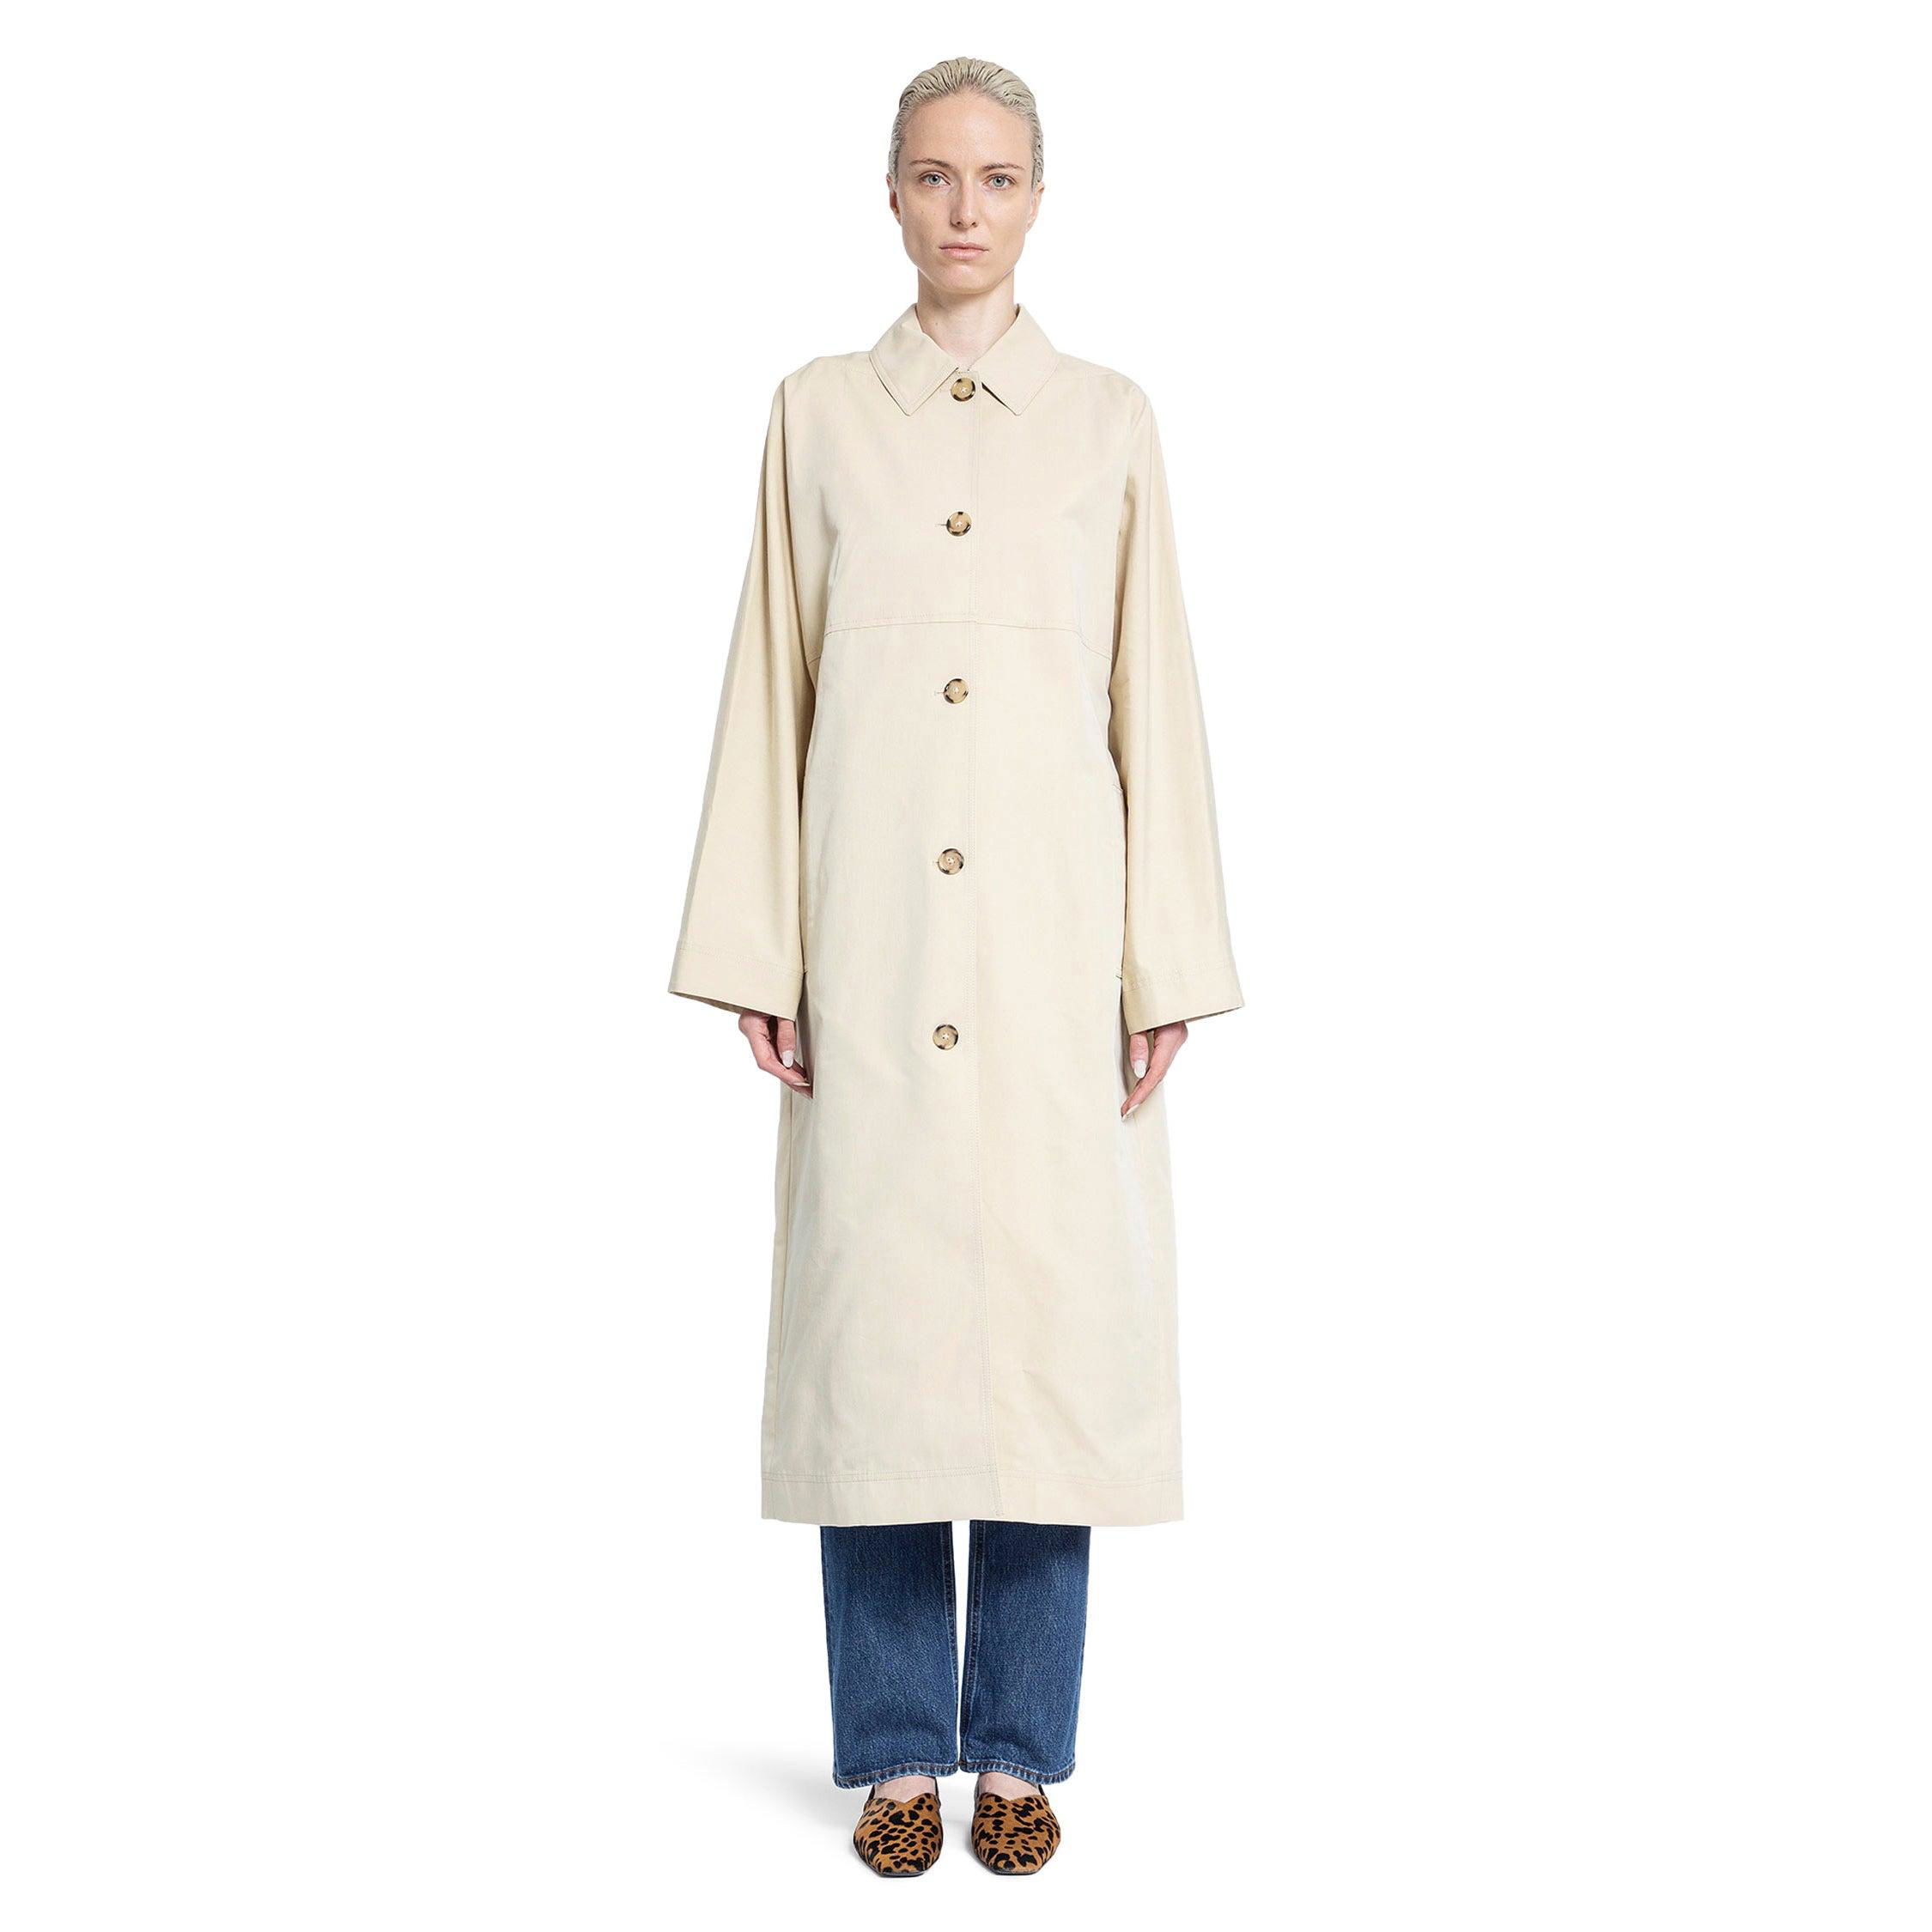 TOTEME WOMAN BEIGE COATS by TOTEME